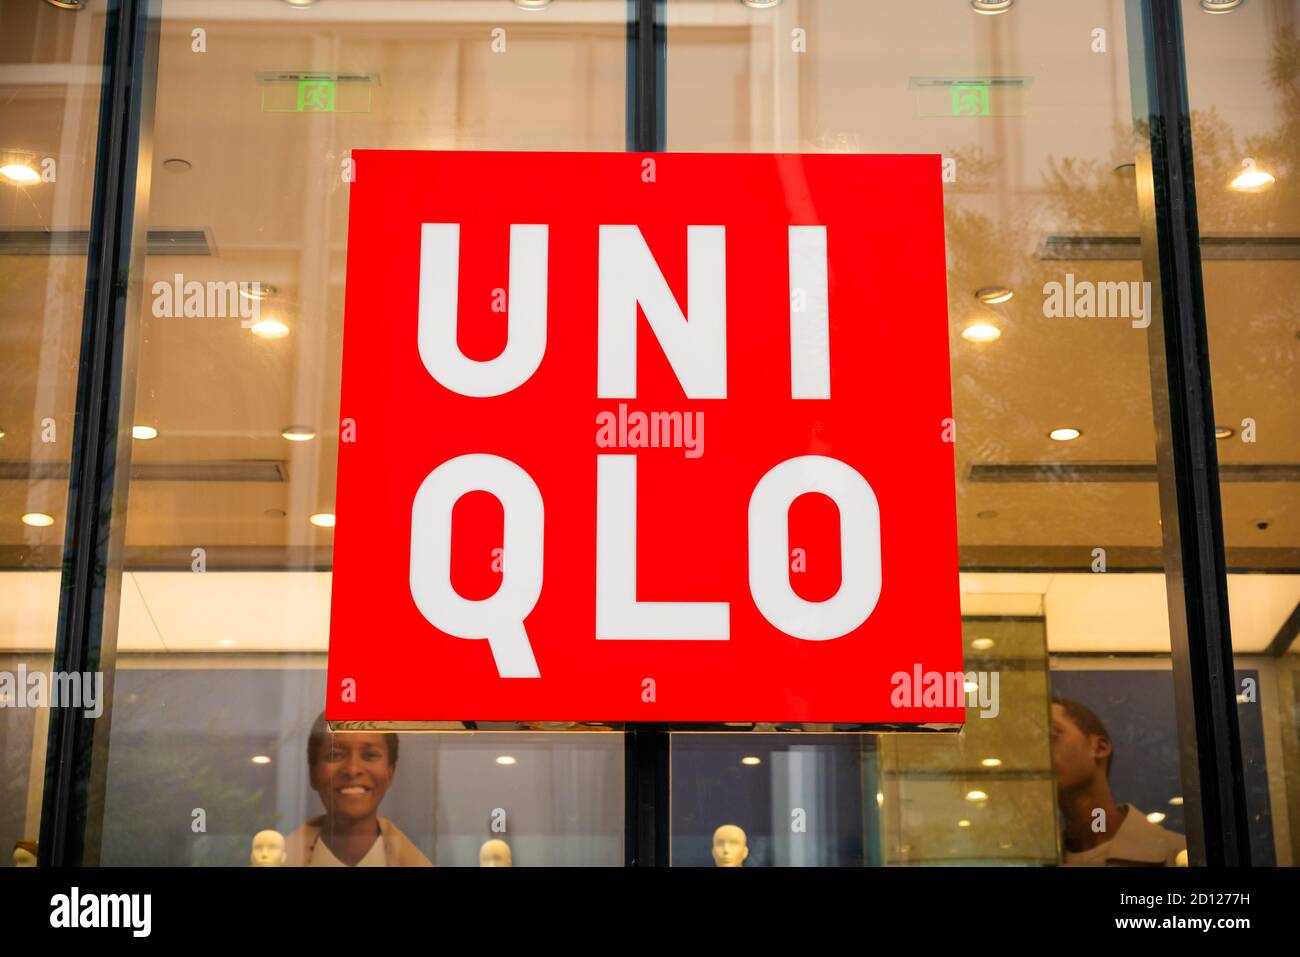 Japanese casual wear designer and manufacturer, Uniqlo logo seen in  Shenzhen Stock Photo - Alamy